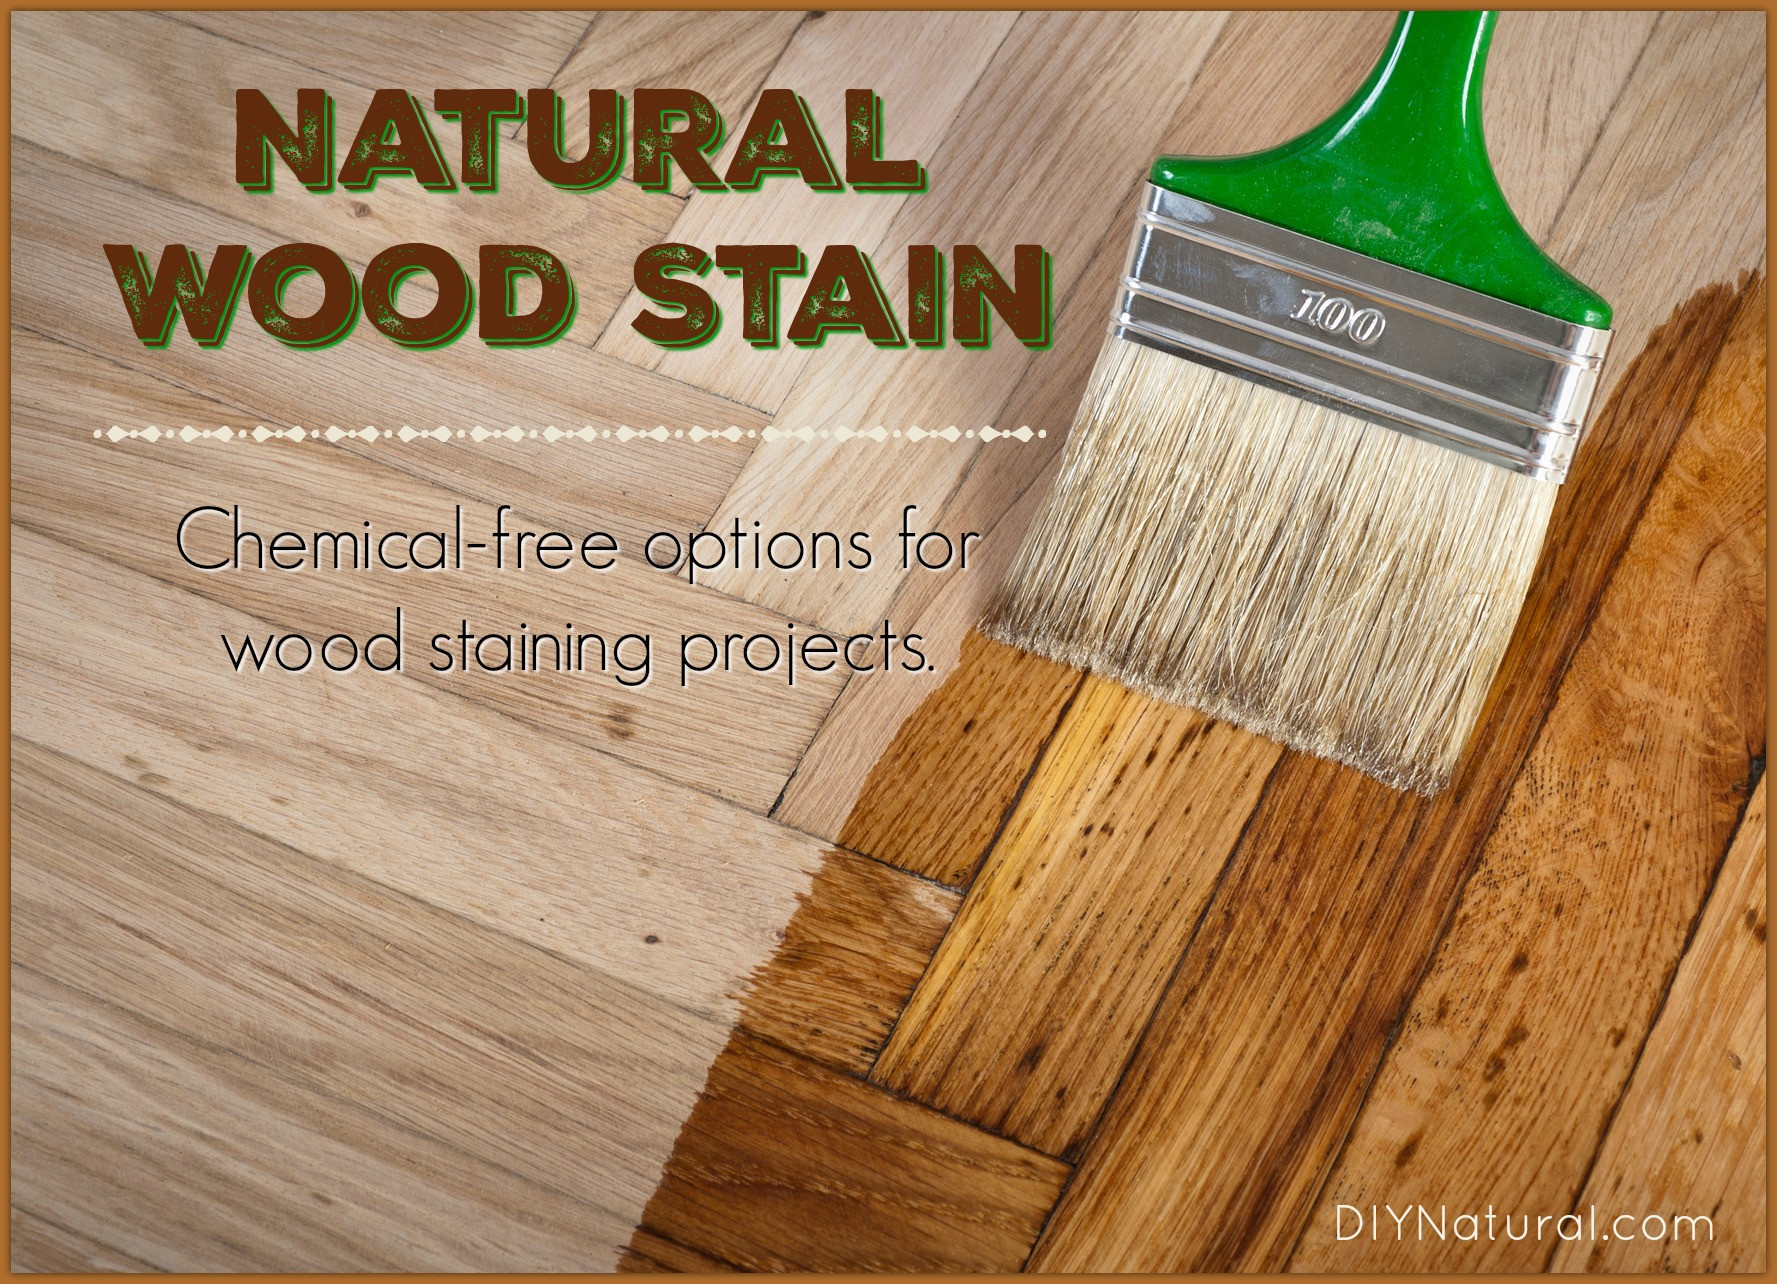 DIY Natural Wood Stain
 Homemade Wood Stain Learn To Make Natural Stain At Home